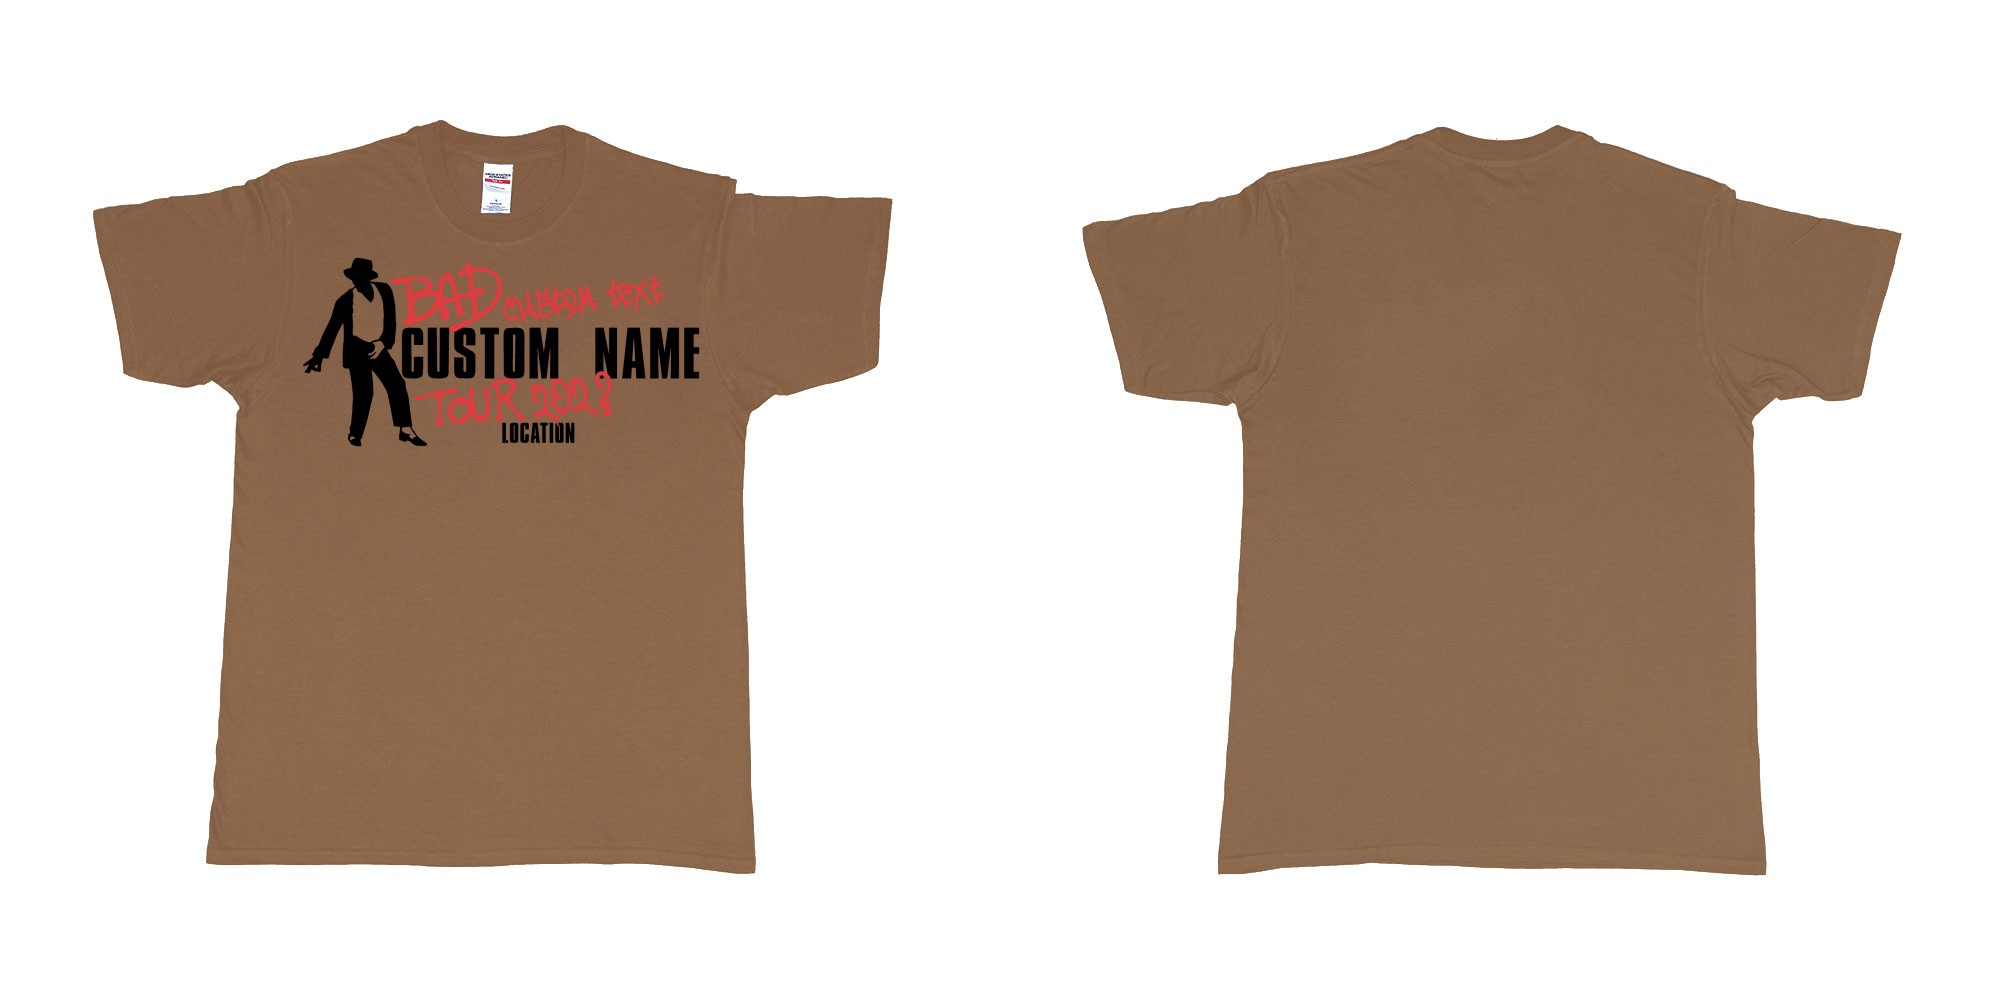 Custom tshirt design michael jackson bad tour custom name year location in fabric color chestnut choice your own text made in Bali by The Pirate Way